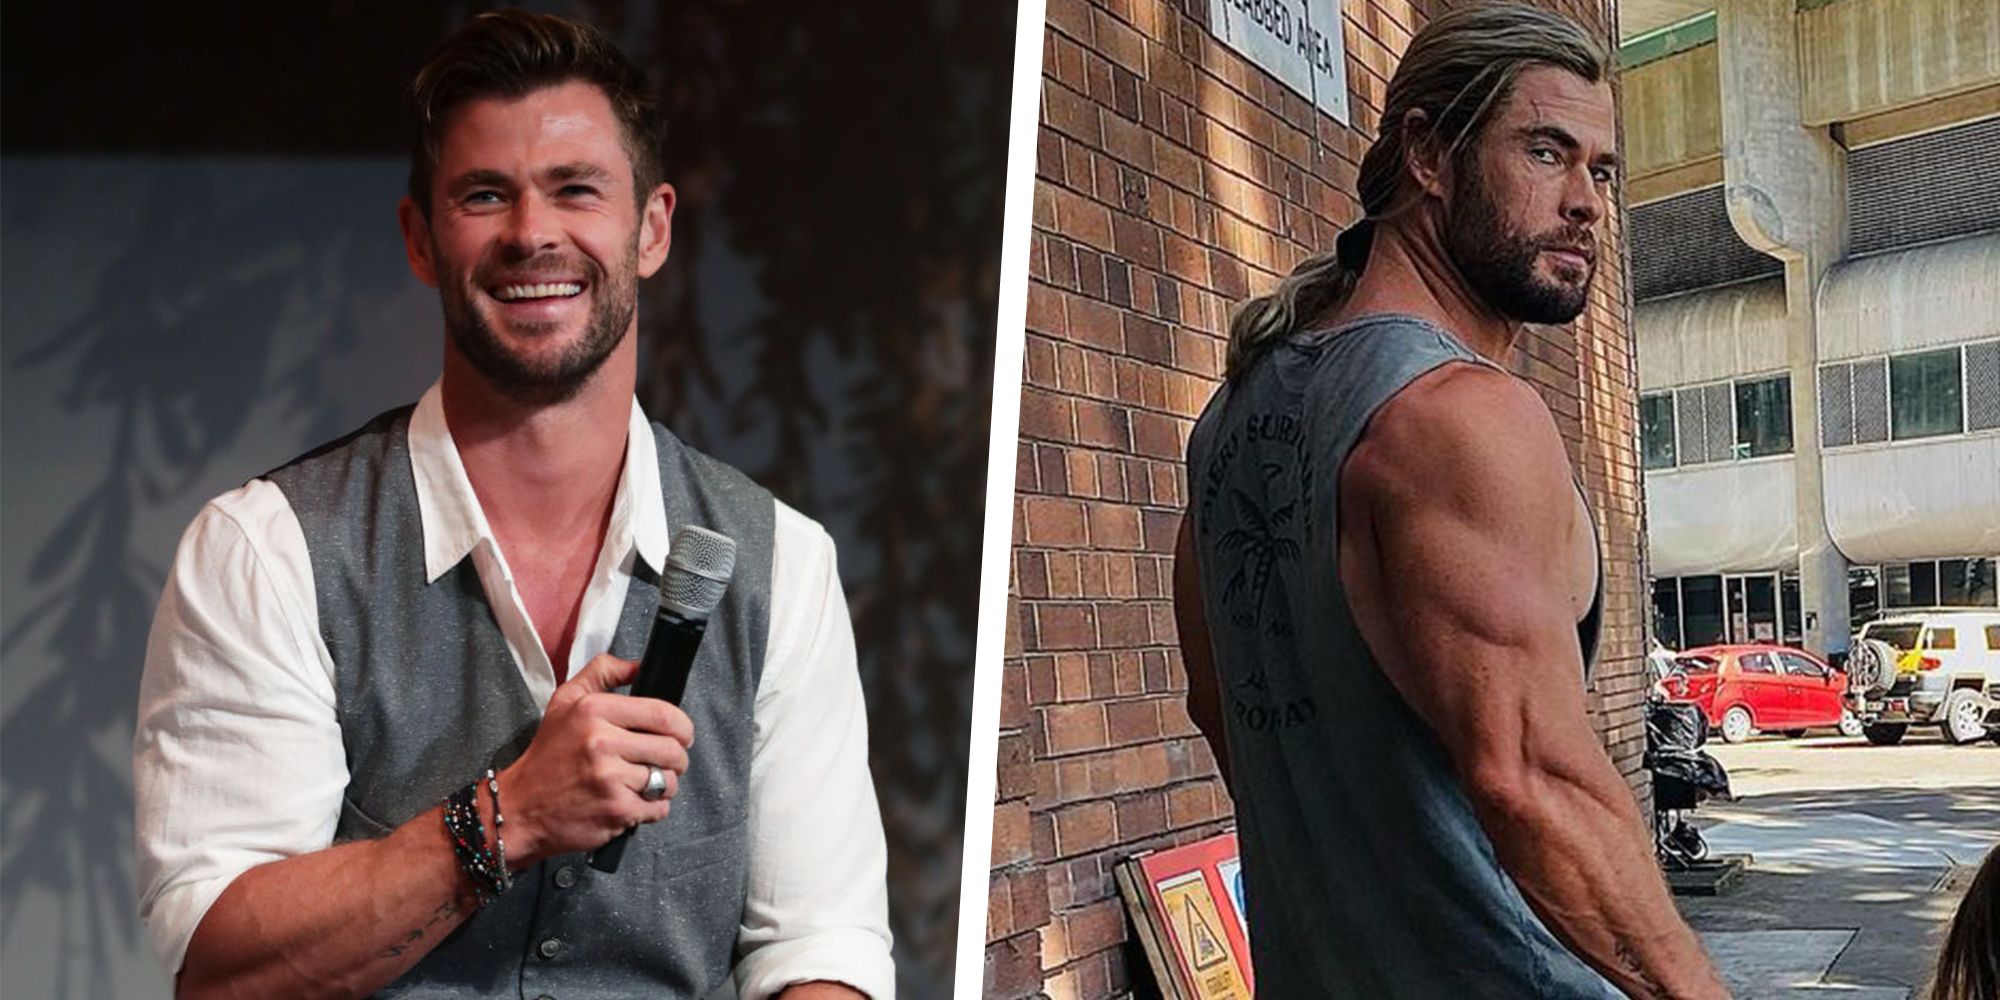 Chris Hemsworth posts photograph of his HUGE ARMS- however individuals are remarking on his THIN LEGS!!!